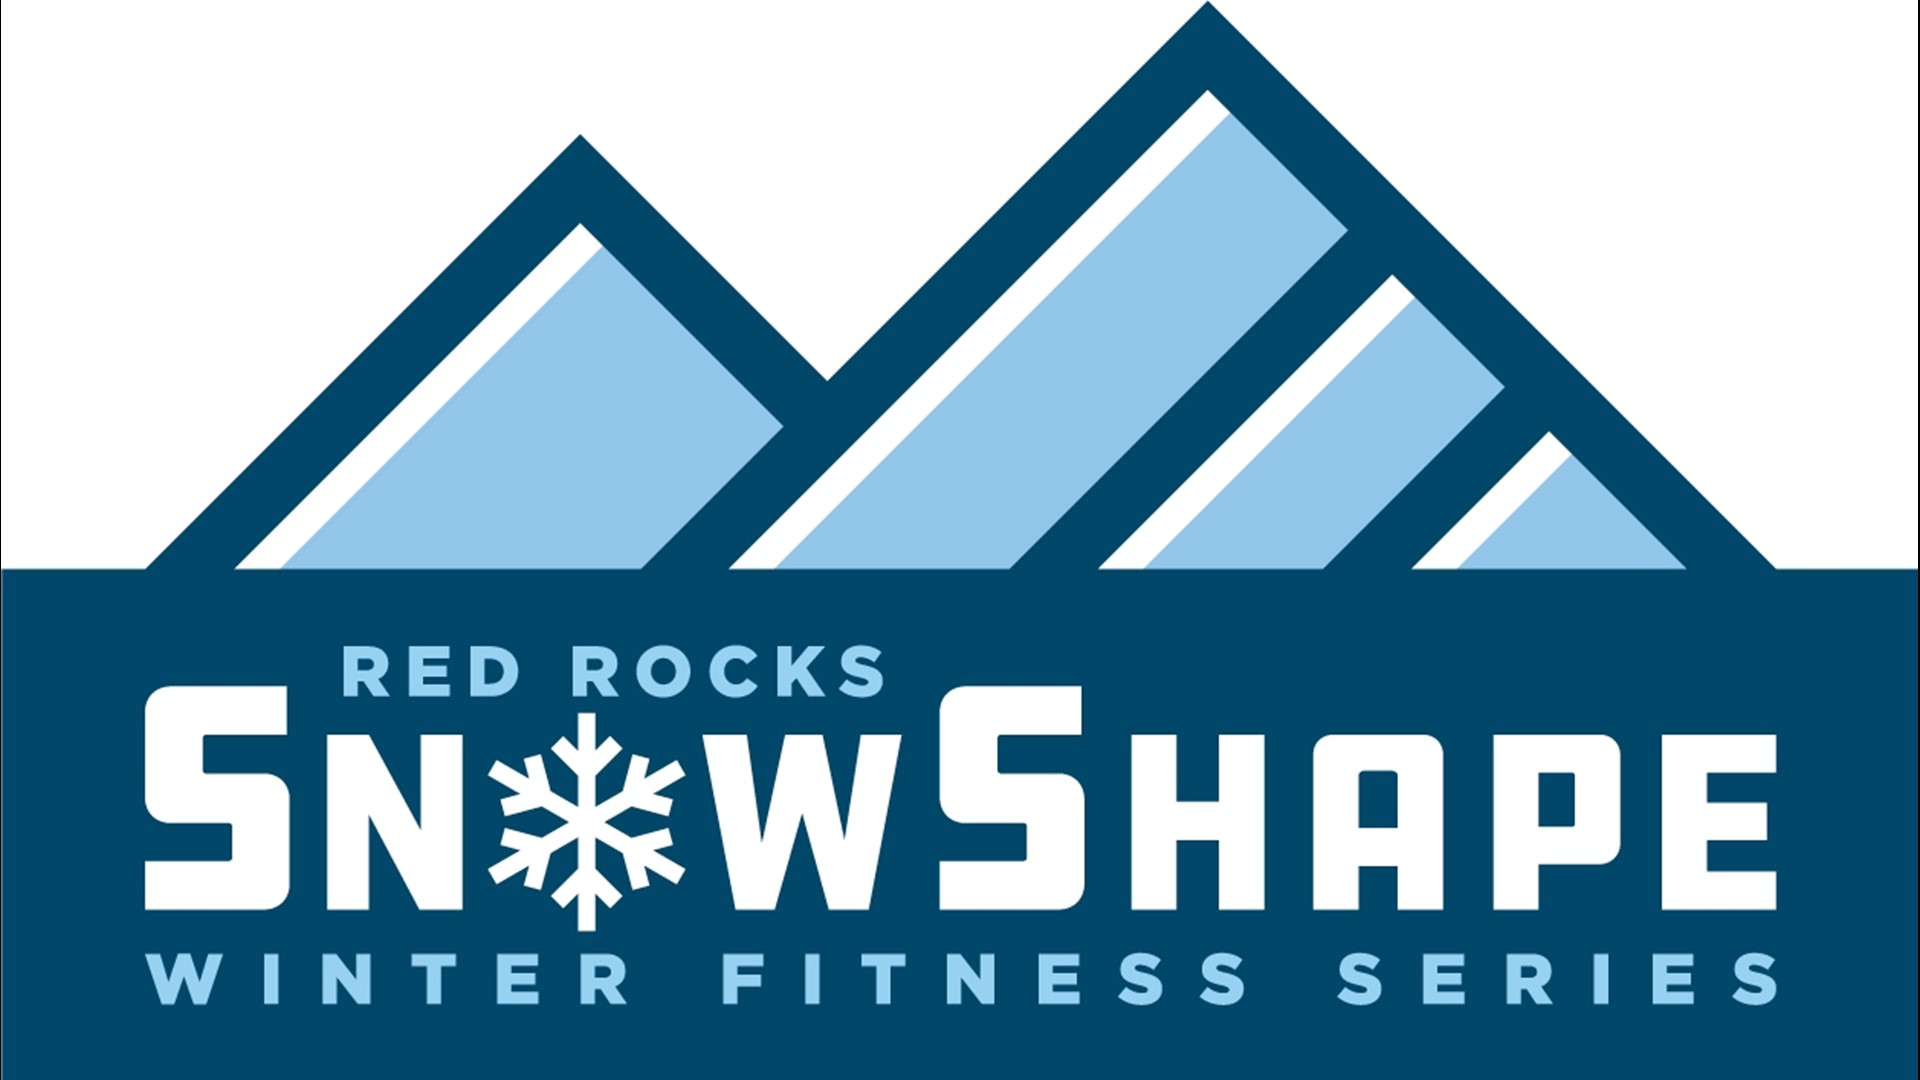 Take a SnowShape class at Red Rocks! Visit RedRocksOnline.com to see upcoming events and to get tickets.